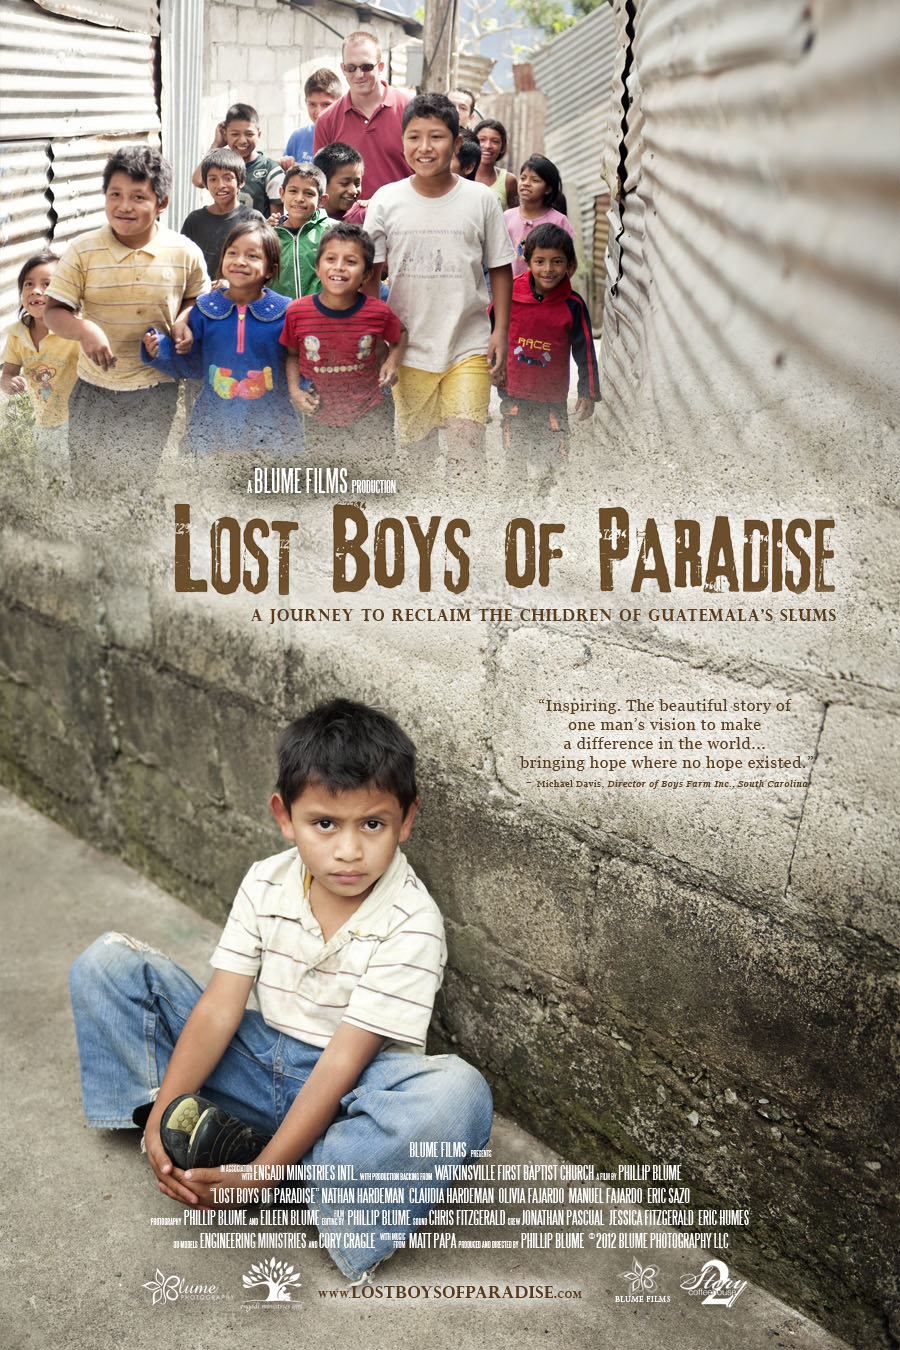 Lost Boys of Paradise